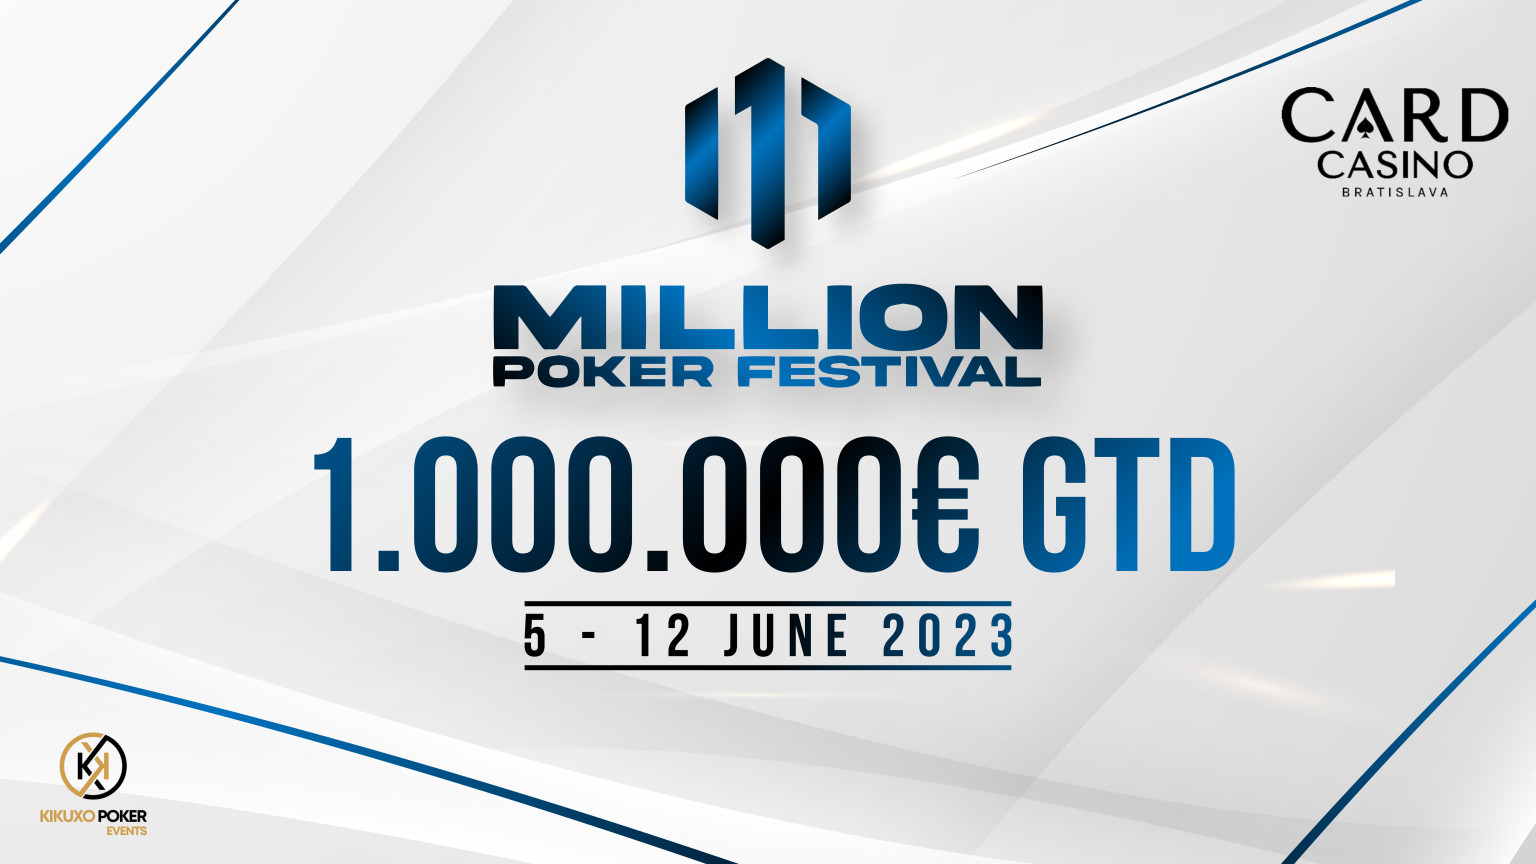 Millionth June awaits us! Check out the highlights of the €1,000,000 GTD festival